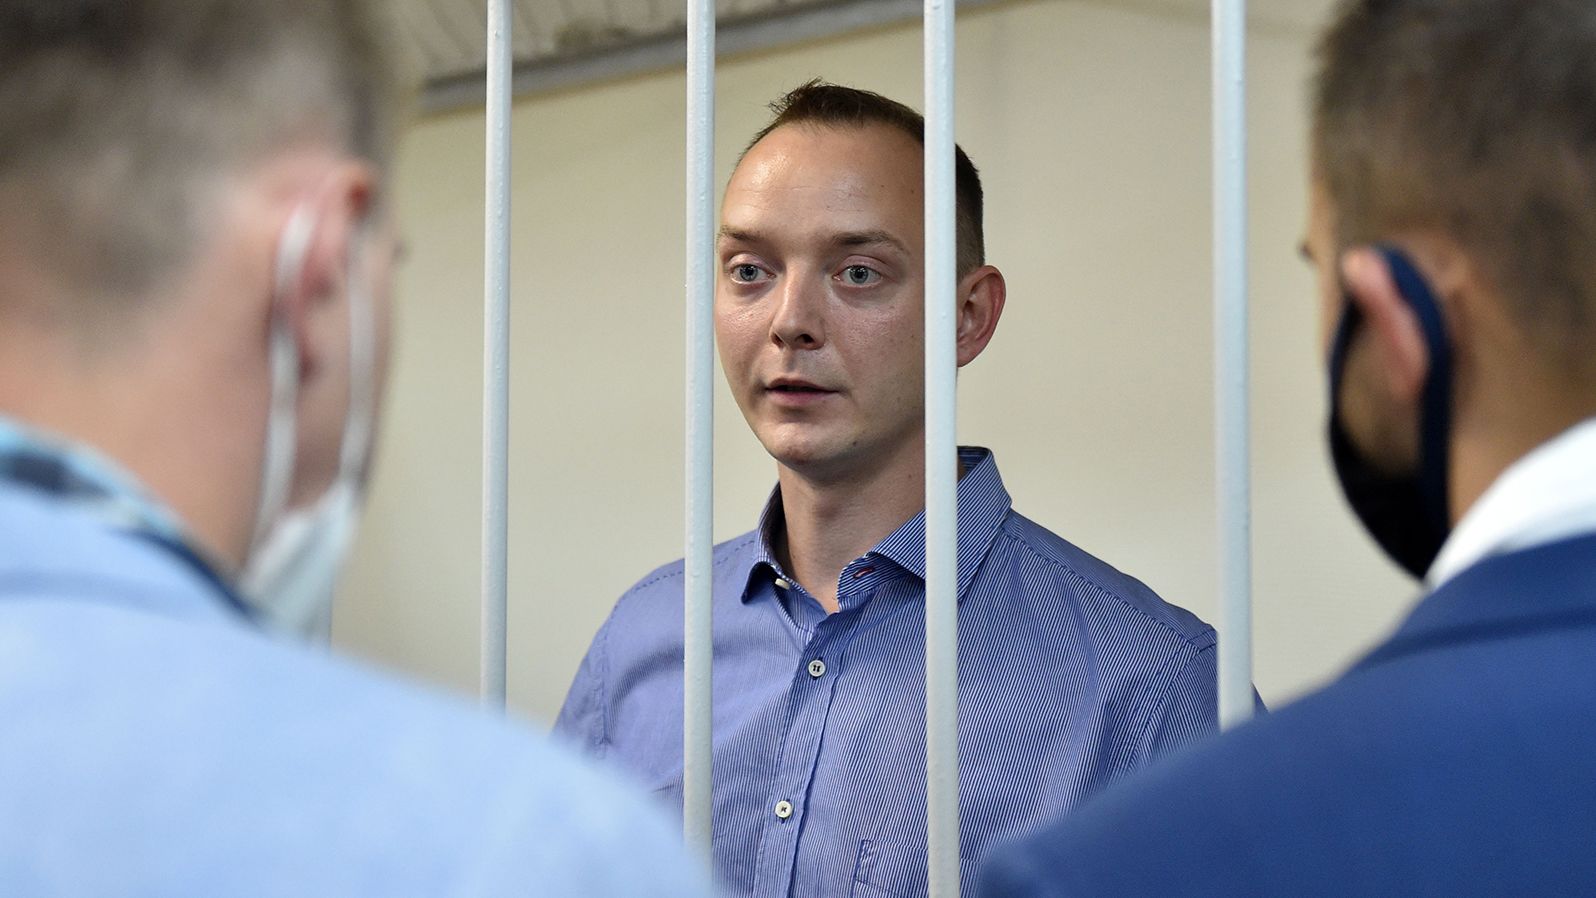 Ivan Safronov, an aide to the head of Russia's space agency Roscosmos, stands inside a defendants' cage during a court hearing in Moscow on July 7